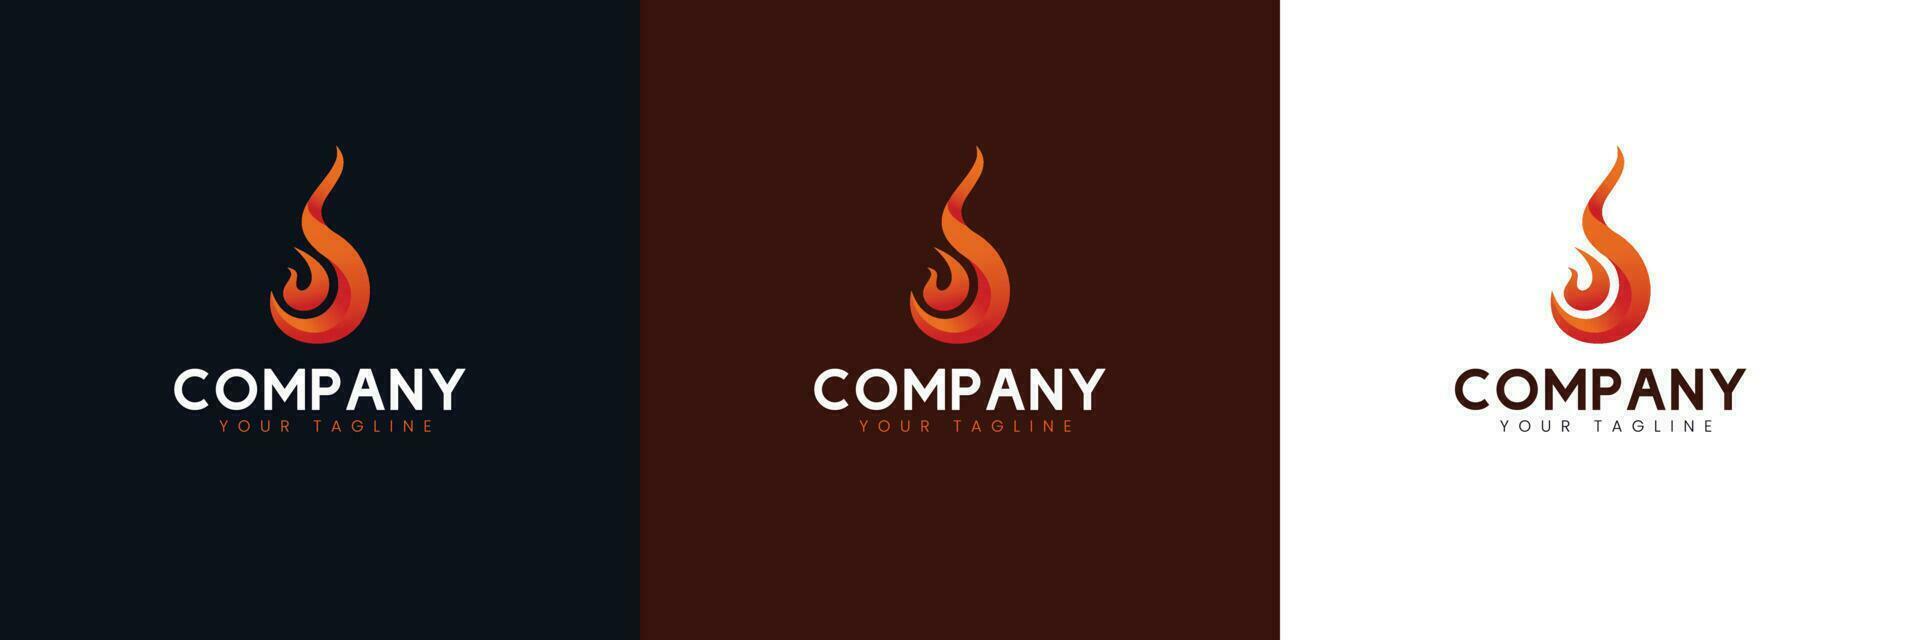 Flaming Fire Logo Set, Suitable for Companies in The Fields of Fire, Games, Brand T-shirts, Video Maker, etc. vector